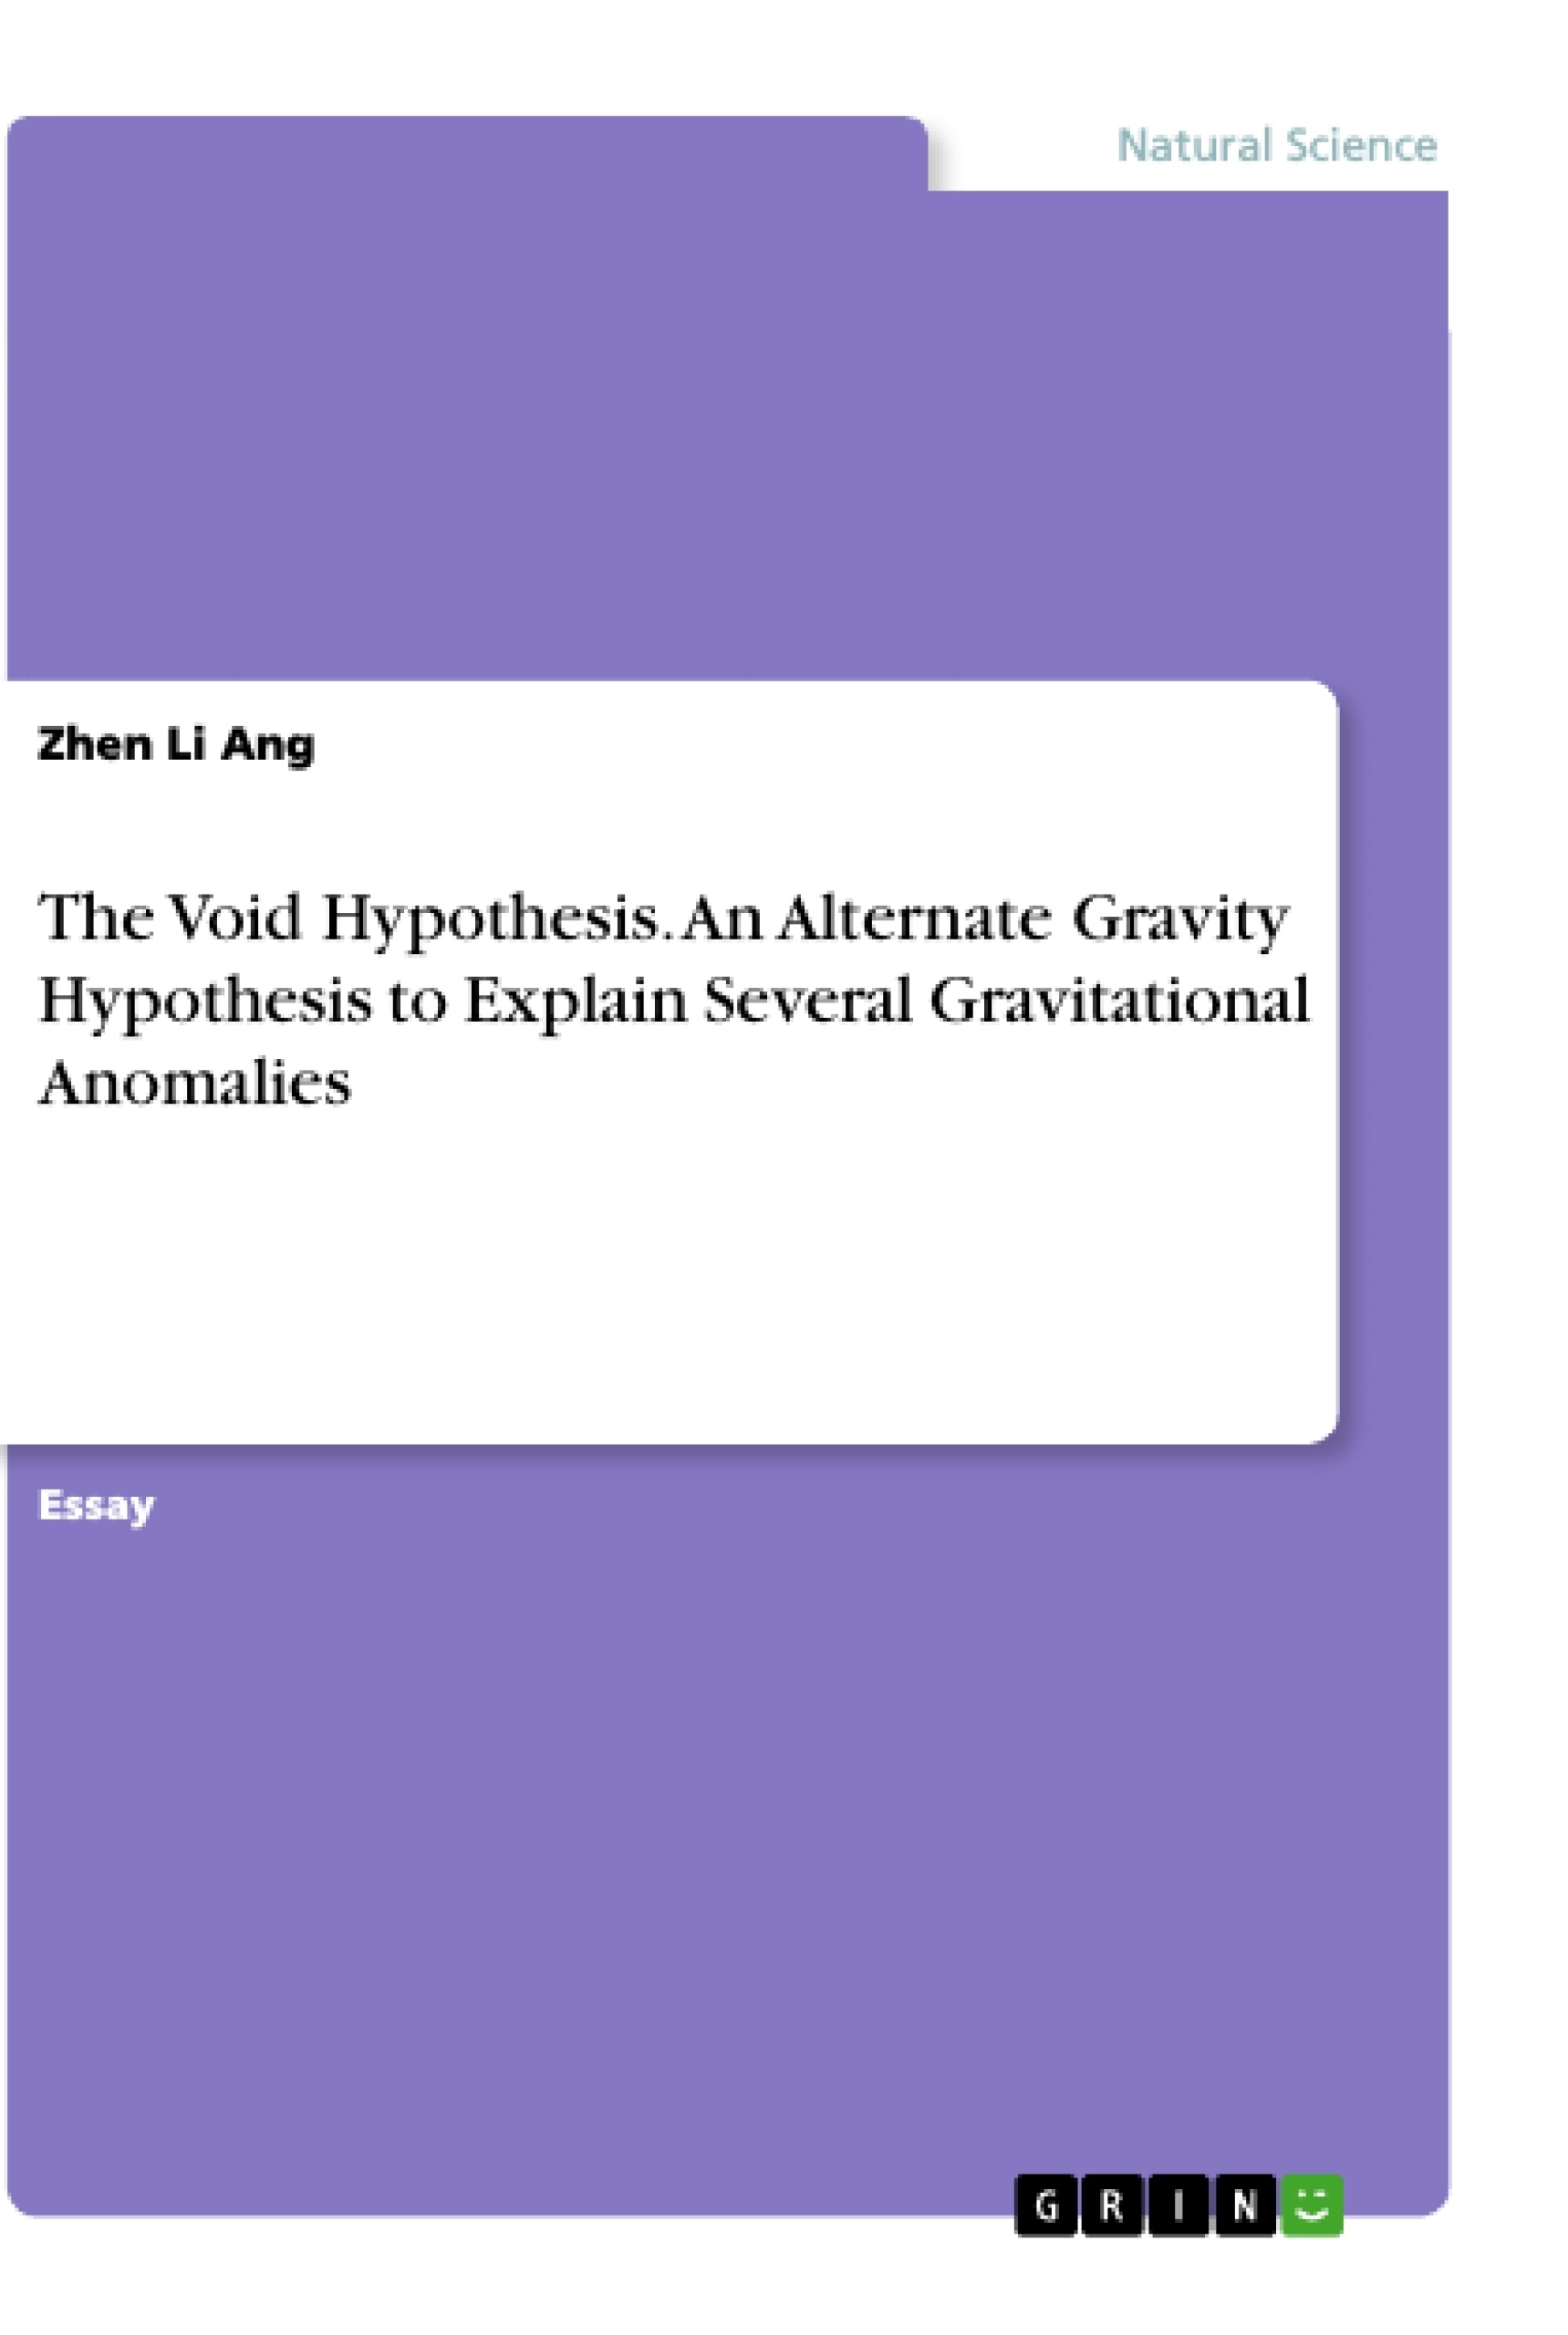 Title: The Void Hypothesis. An Alternate Gravity Hypothesis to Explain Several Gravitational Anomalies